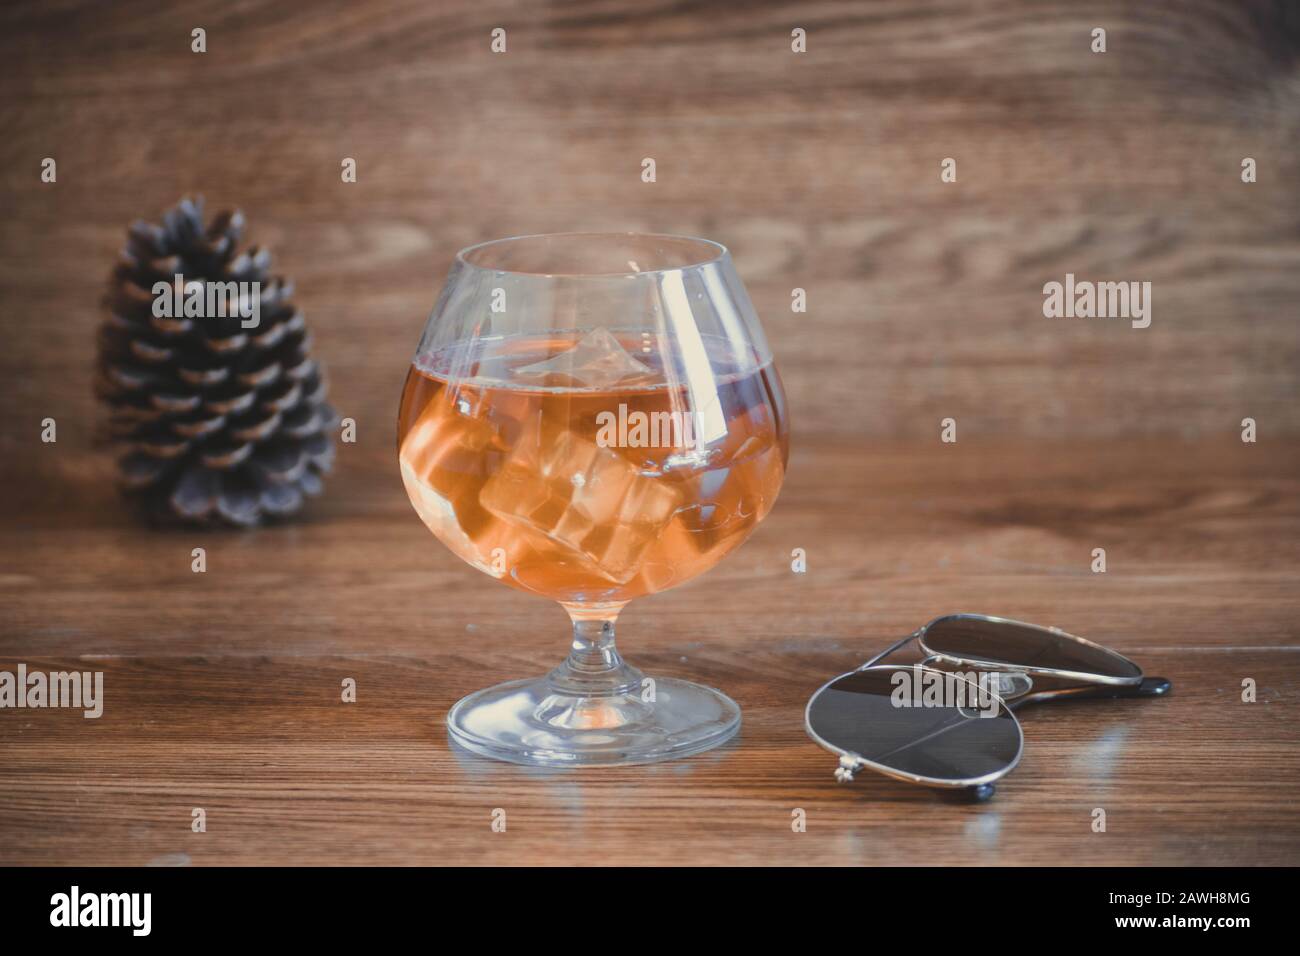 Business composition with glass with delicious whiskey next to aviator lenses. on oak boards Stock Photo